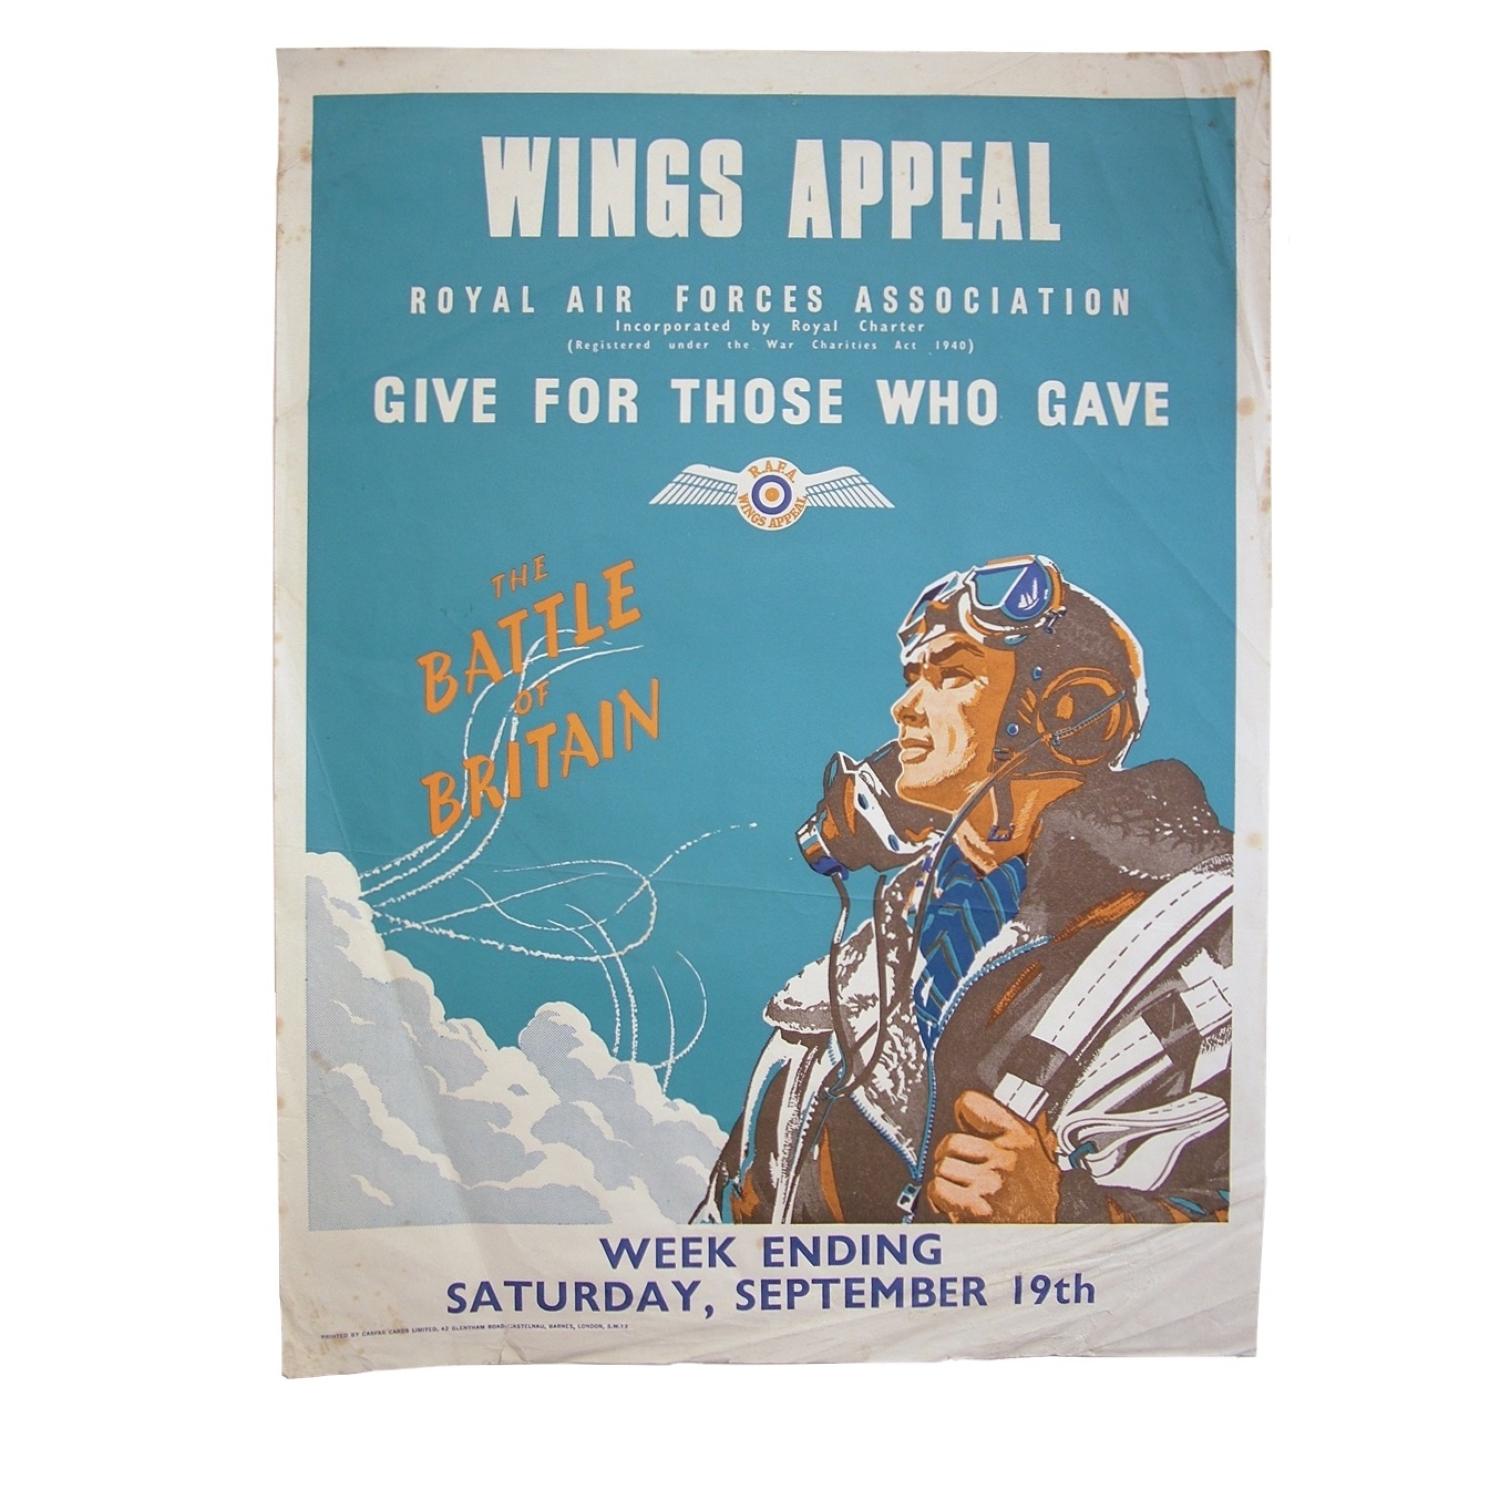 Battle of Britain wings appeal poster